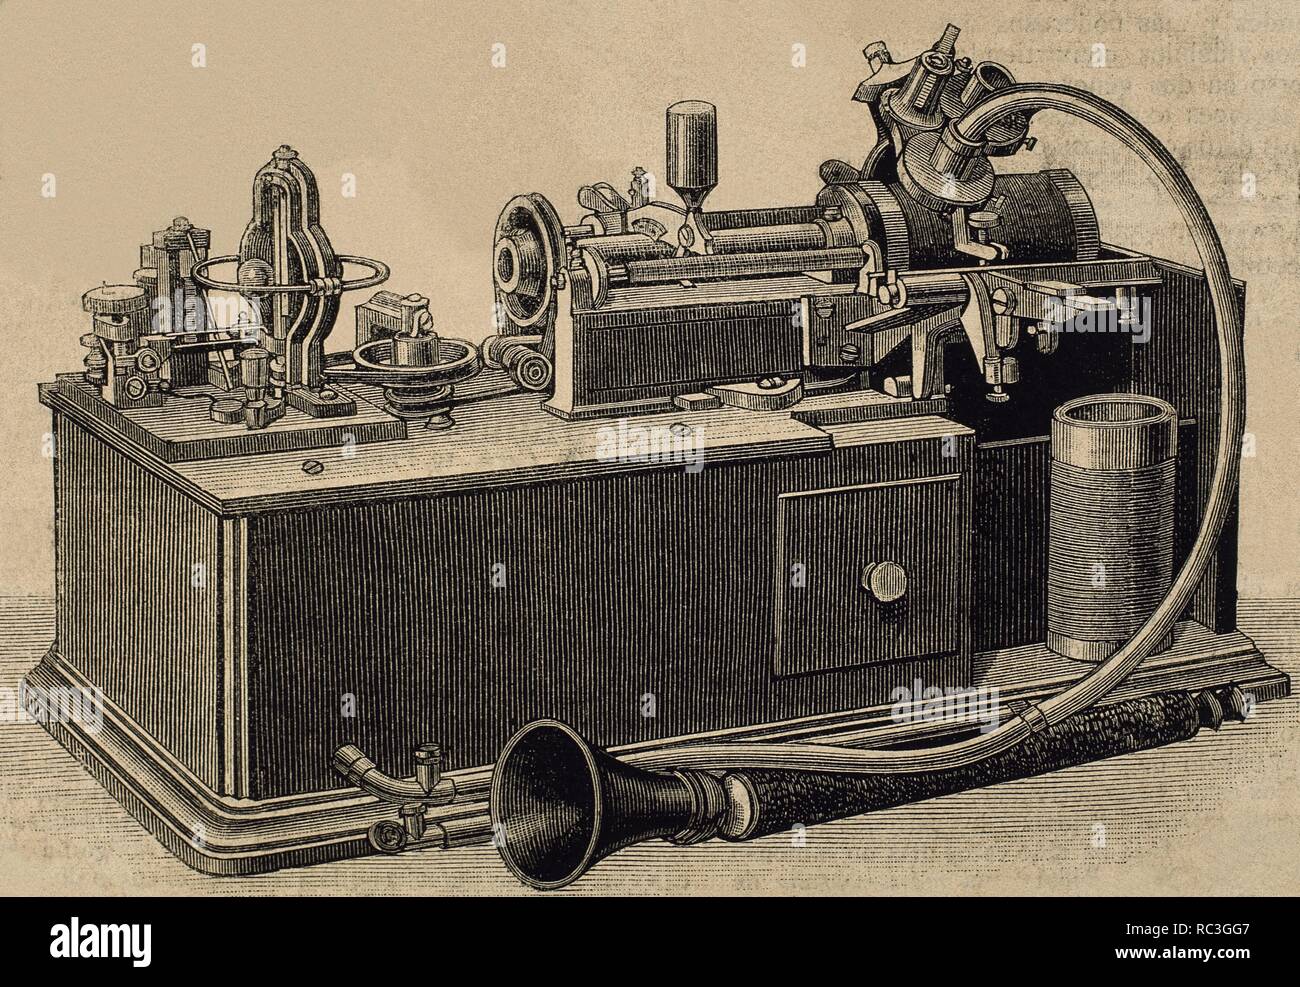 Phonograph invented in 1877 by Thomas Alva Edison (1847-1931).  Engraving, 19th century. Stock Photo